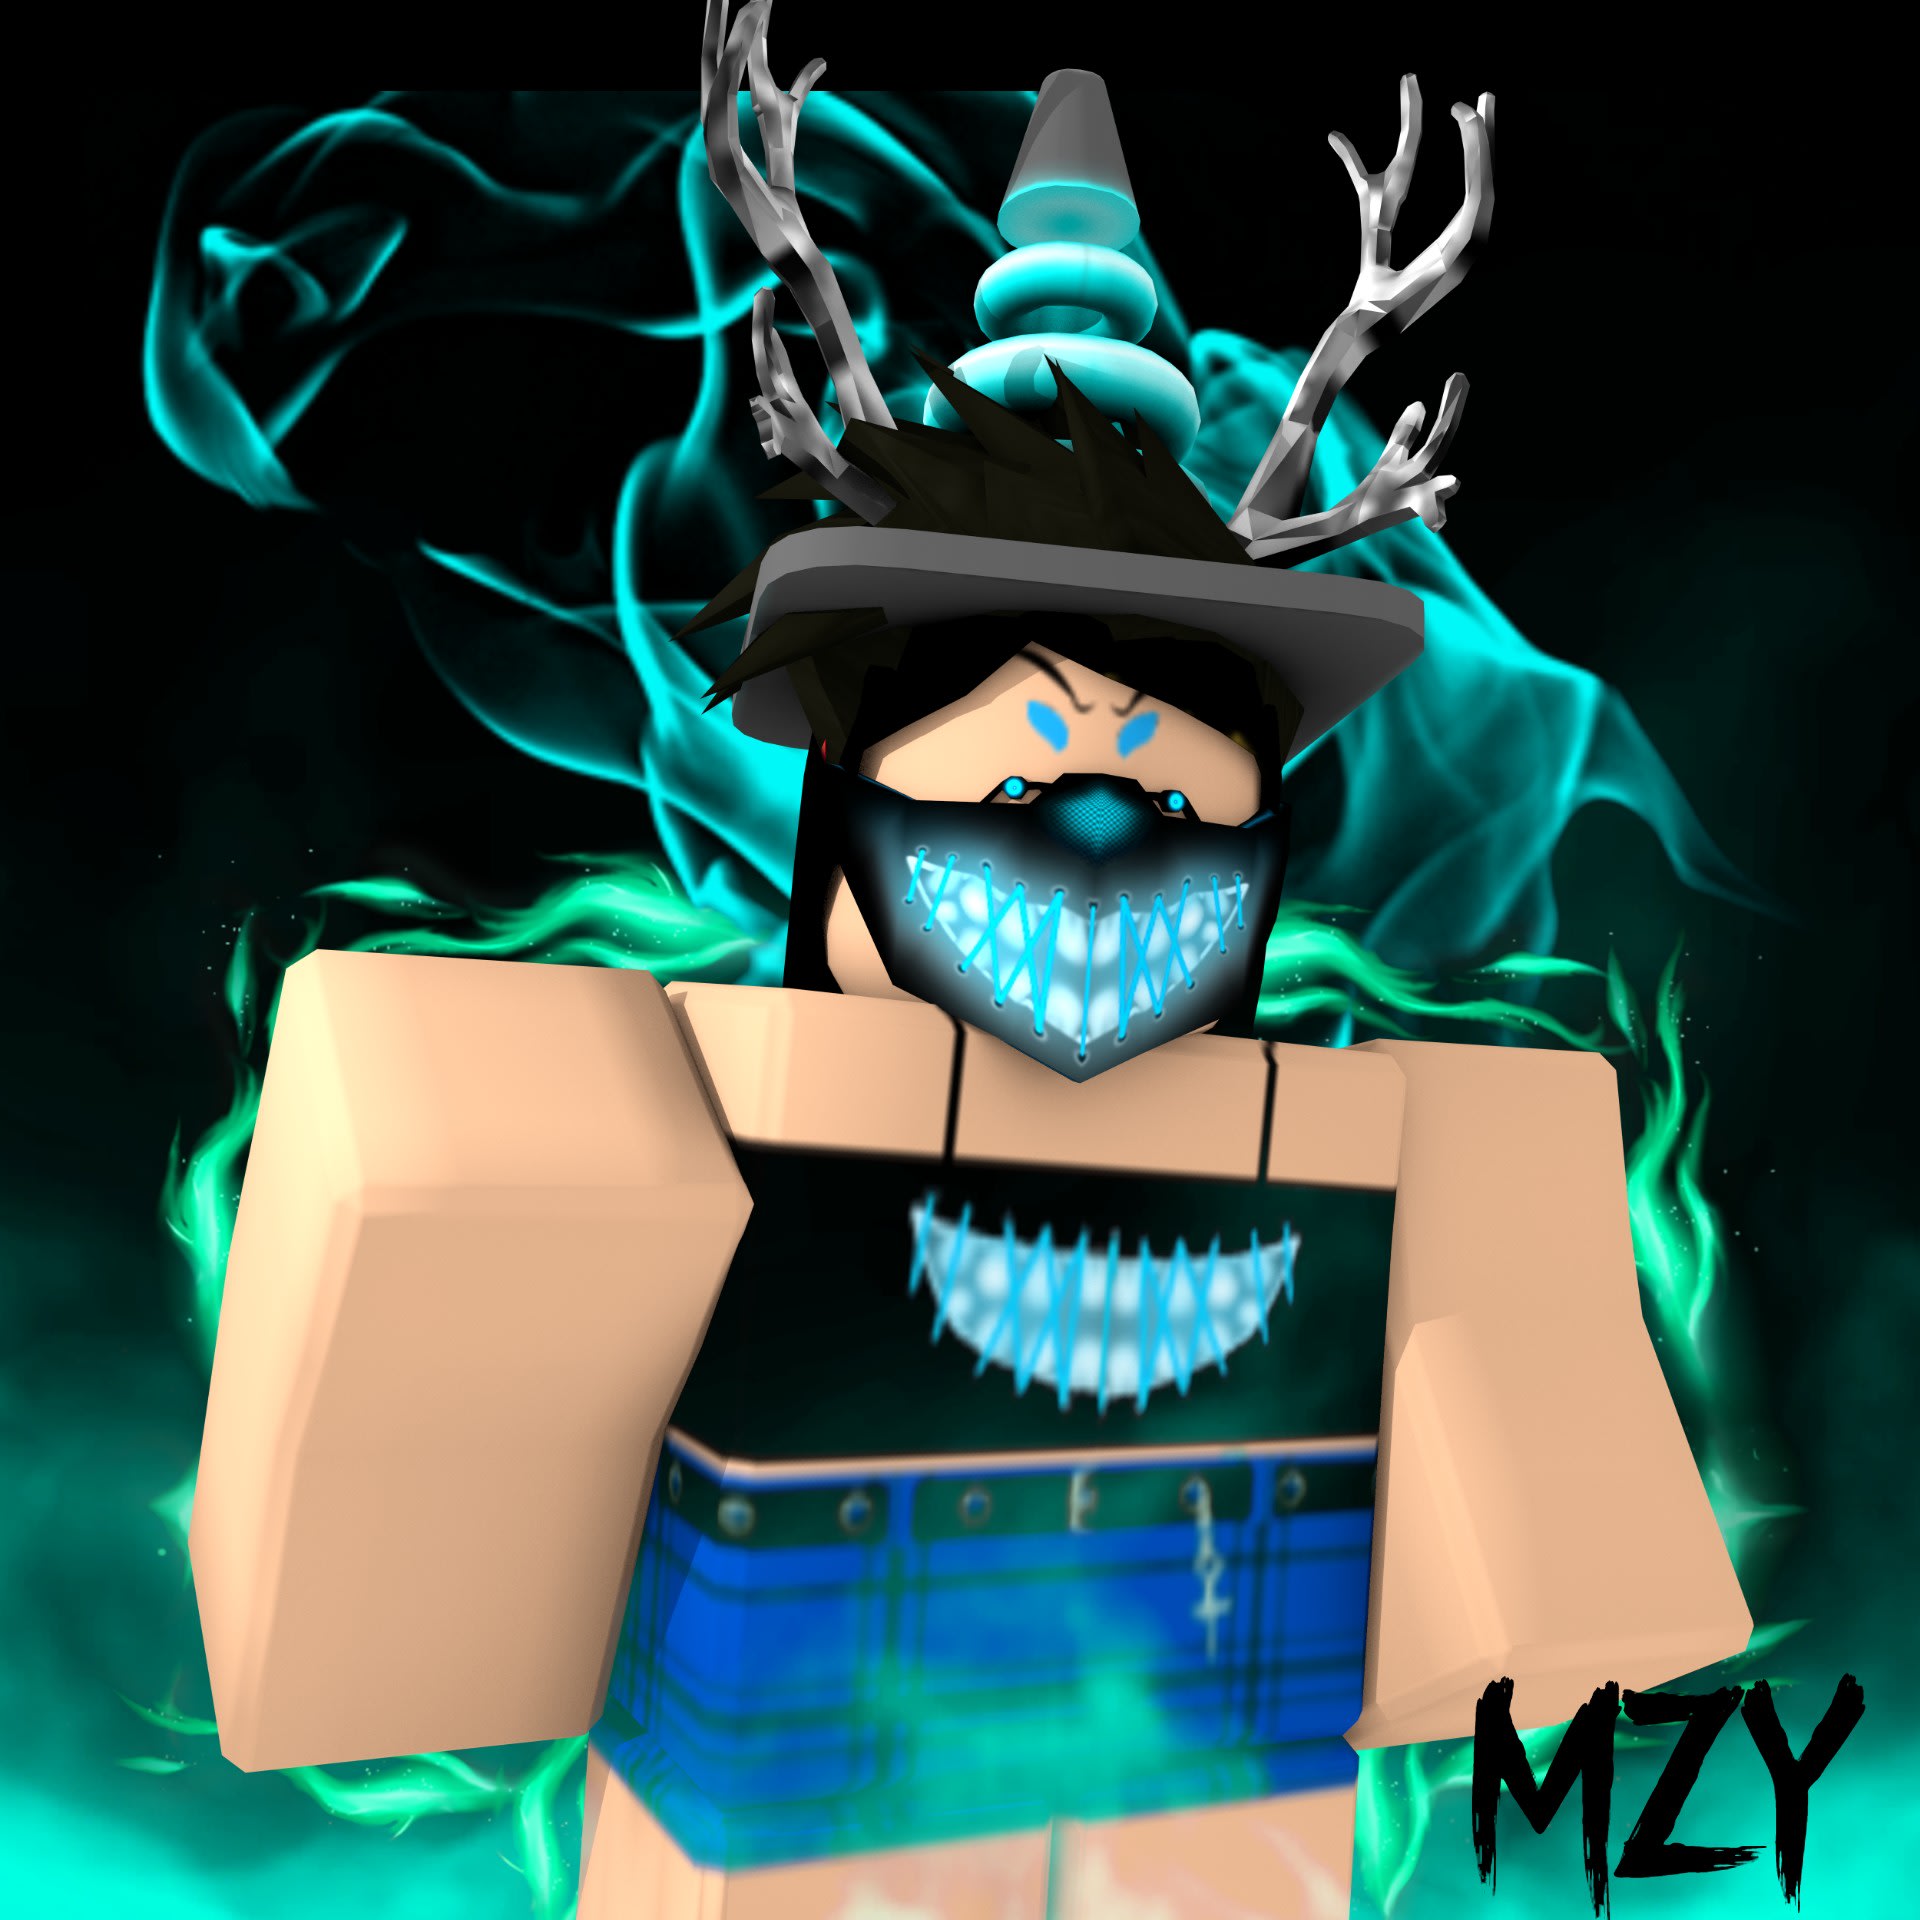 Make A Roblox Gfx By Devmzy - roblox clothing makers discord